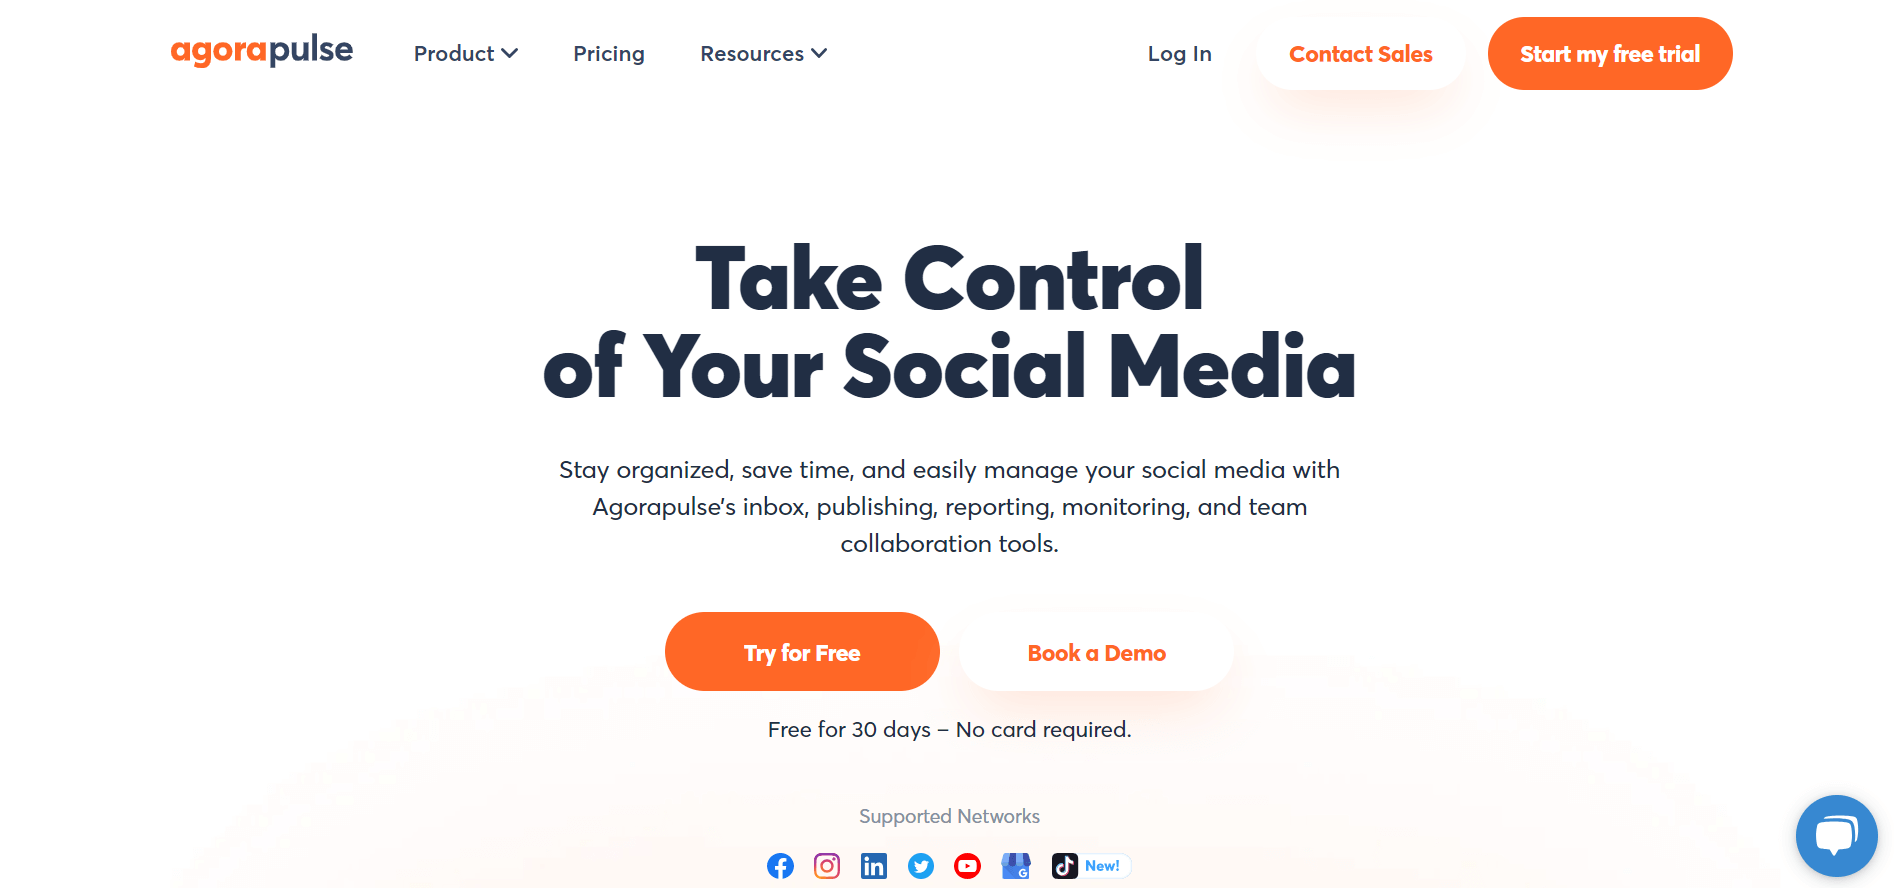 Agorapulse homepage showing the motto "Take control of your social media" motto in big, centered letters.